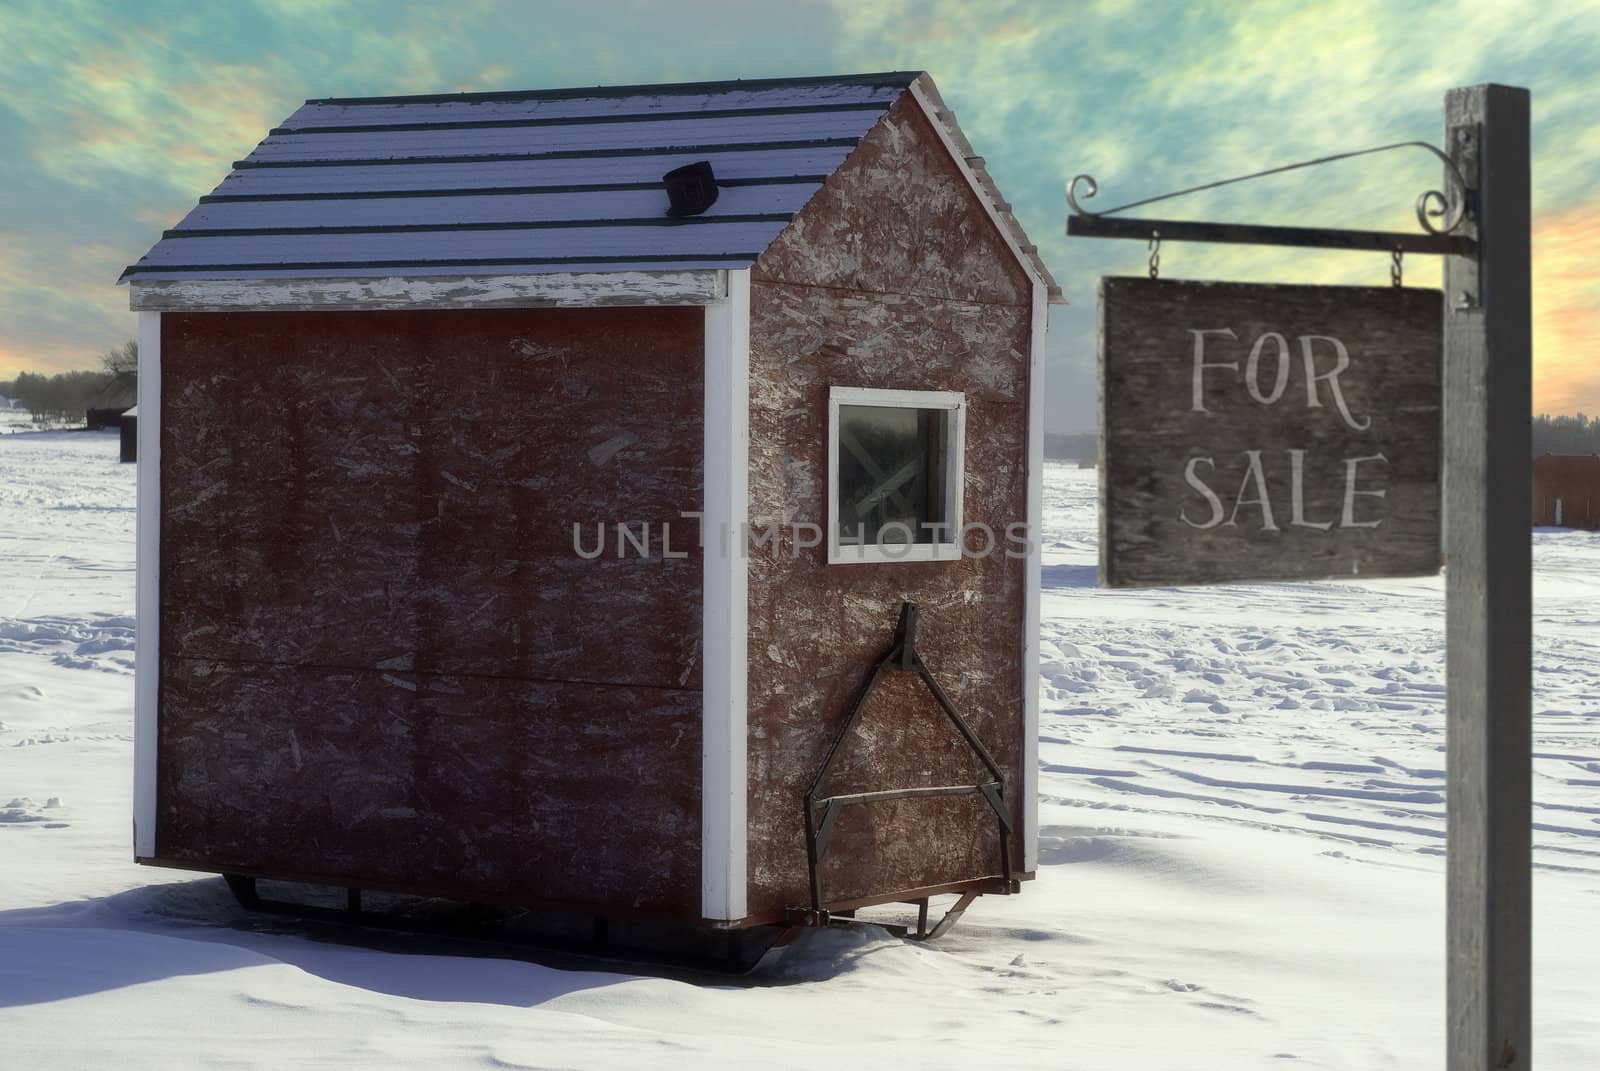 An ice fishing shed is for sale with a sign saying so.